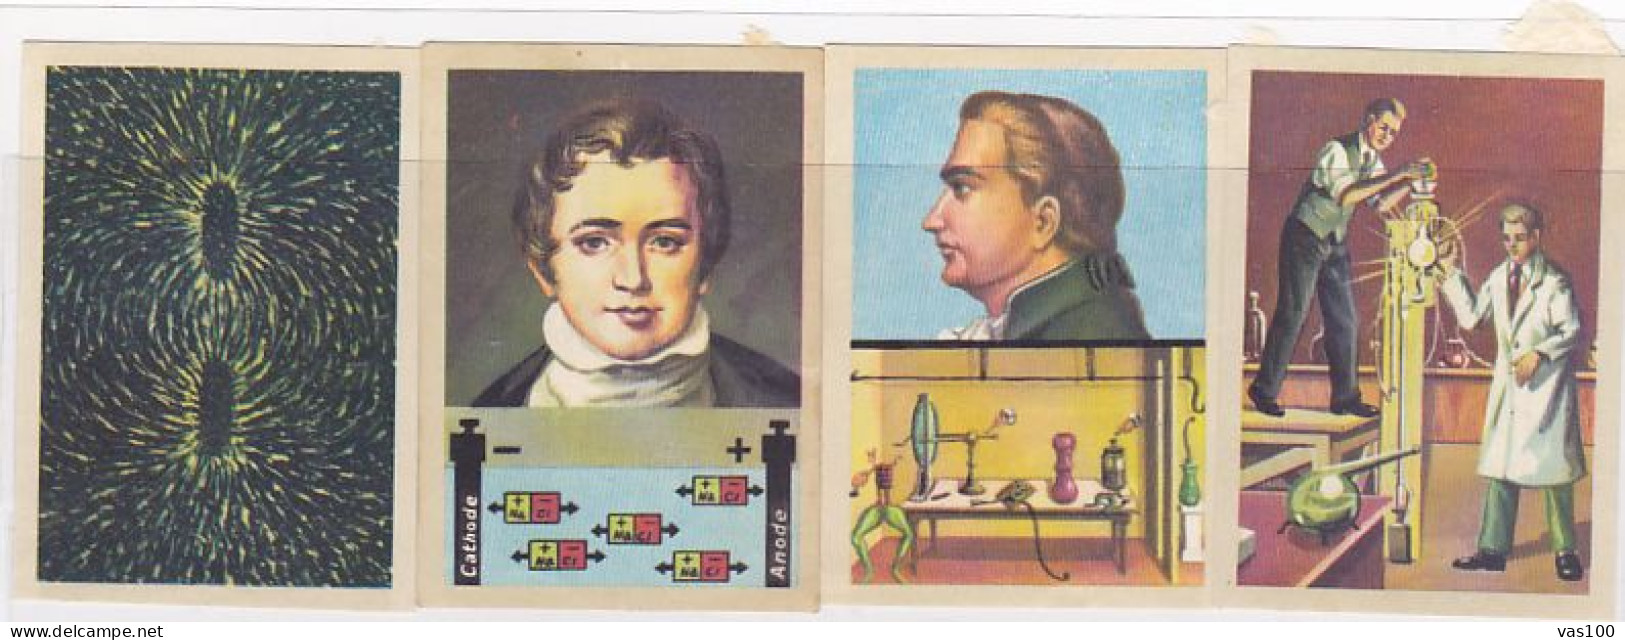 TRADE CARDS, CHOCOLATE, JACQUES, SCIENCE- ELECTRICITY, 4X - Jacques